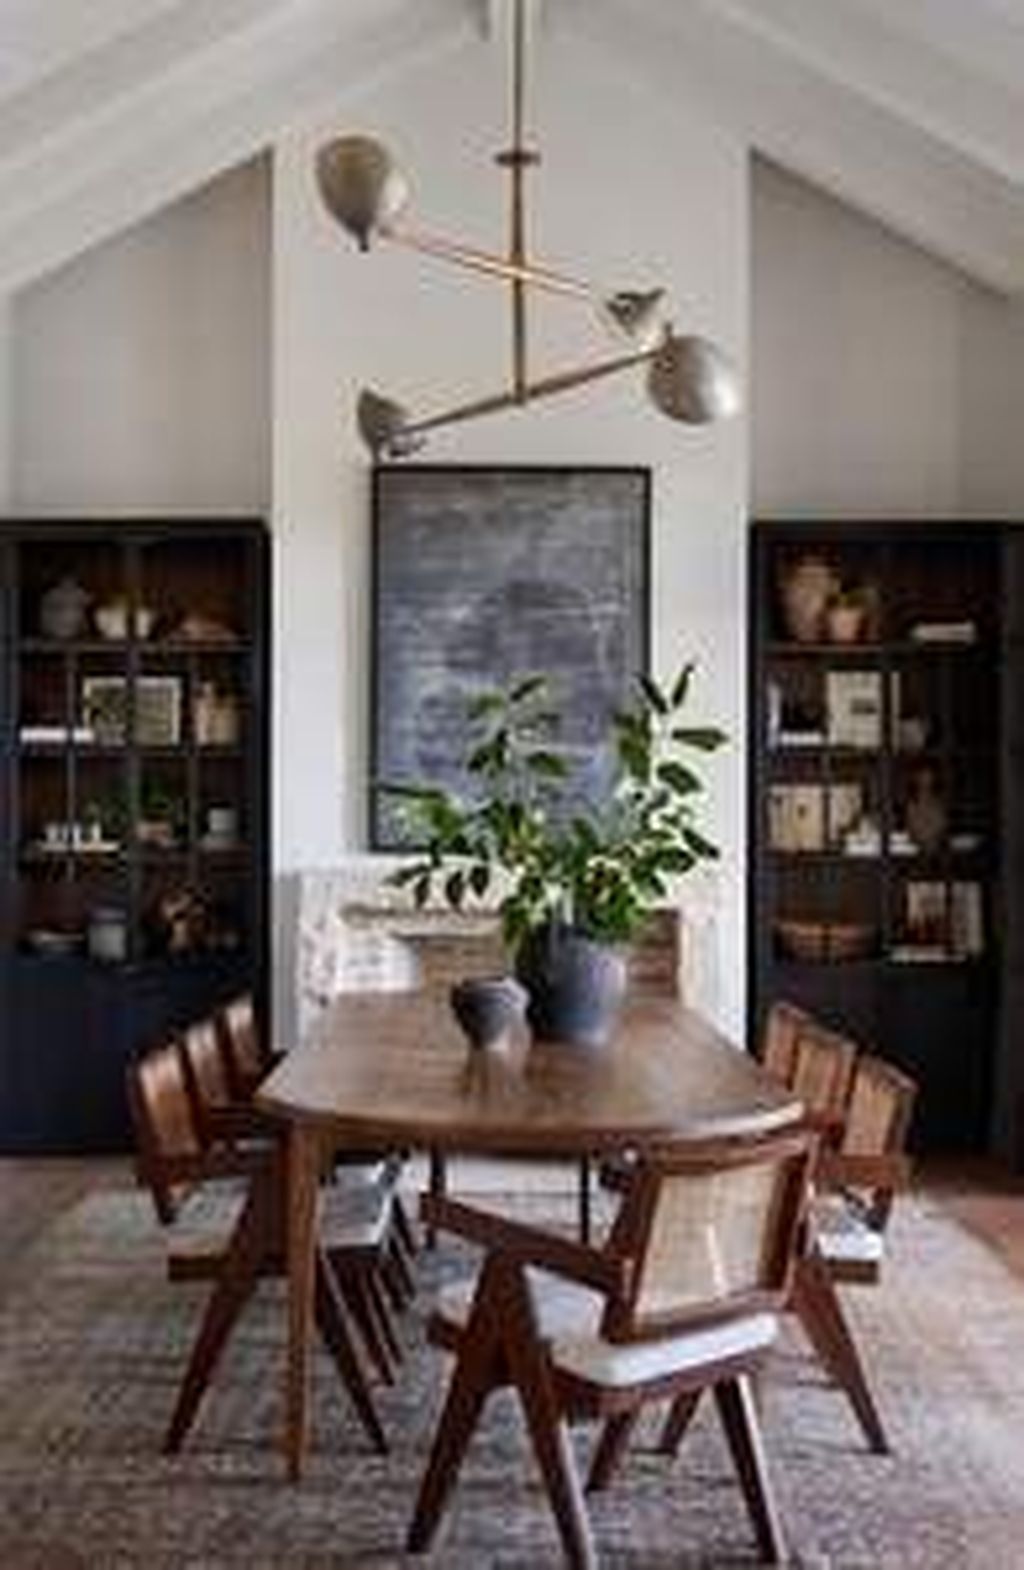 32 Stunning Dining Room Table Design With Modern Style - PIMPHOMEE